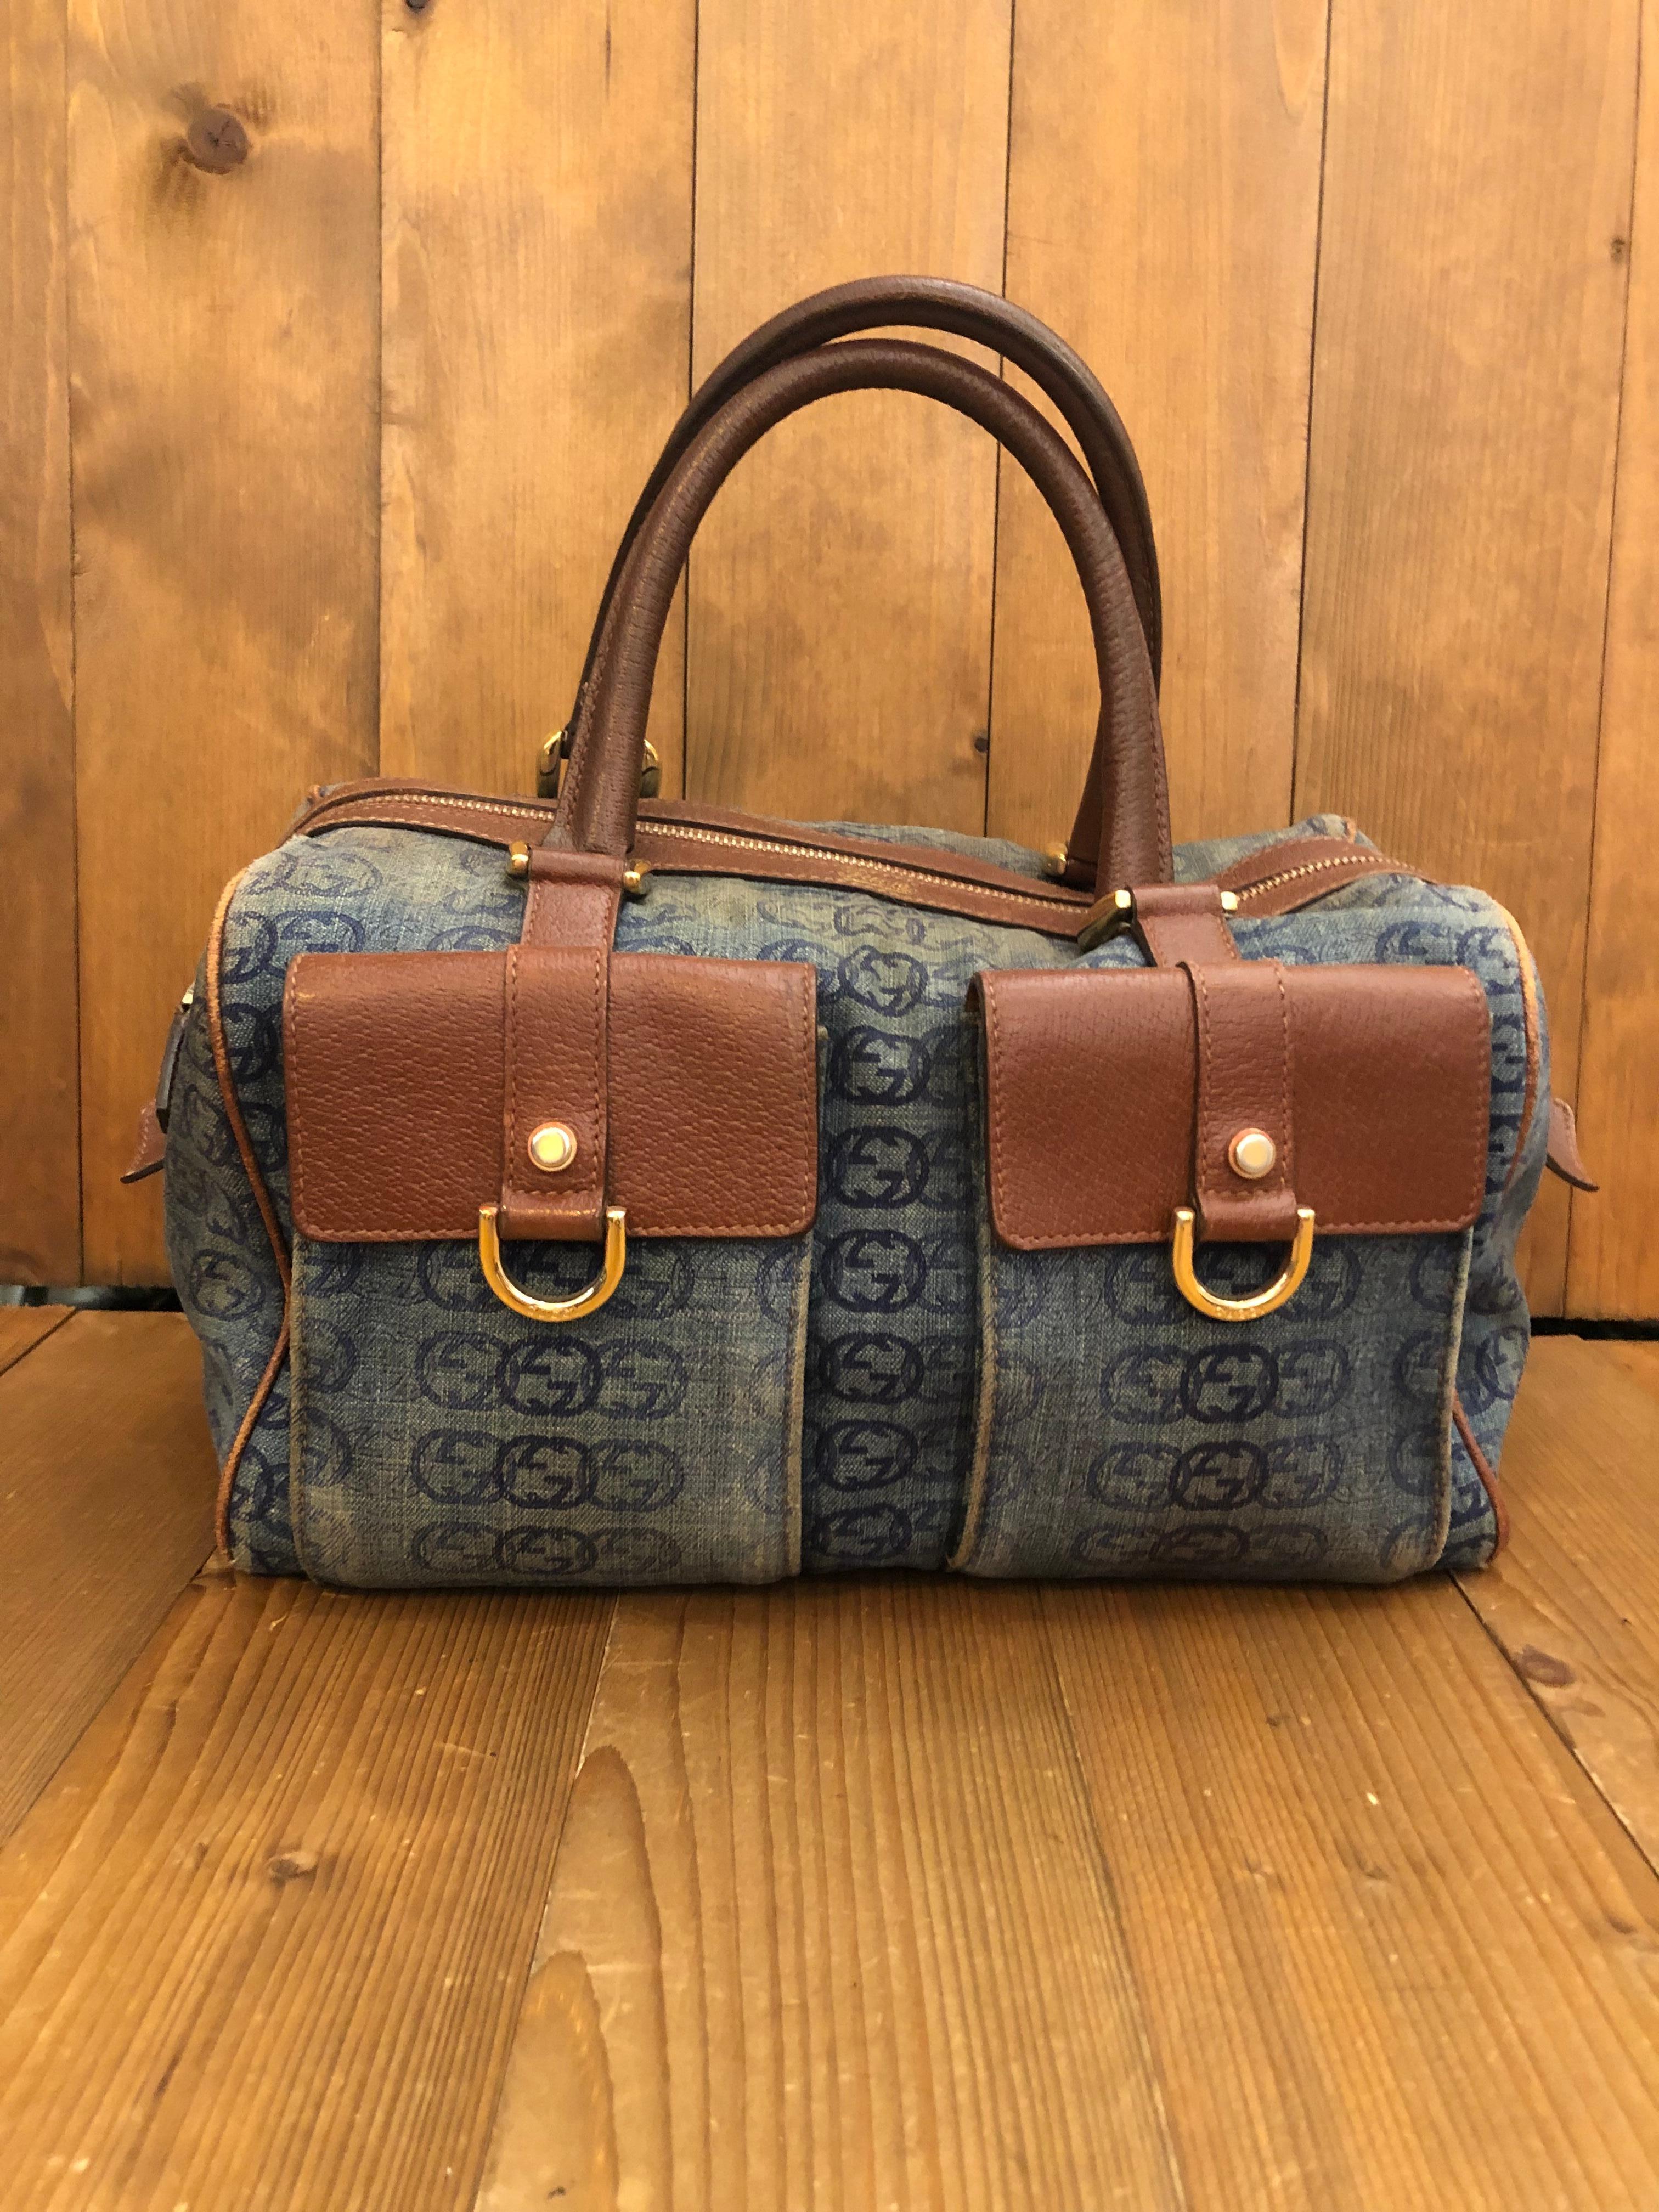 This vintage GUCCI boston bag is crafted of Gucci GG monogram in blue denim and brown leather with light gold toned hardware. Top zipper closure opens to a spacious brown fabric interior with zippered and patch pockets. This boston bag is perfect